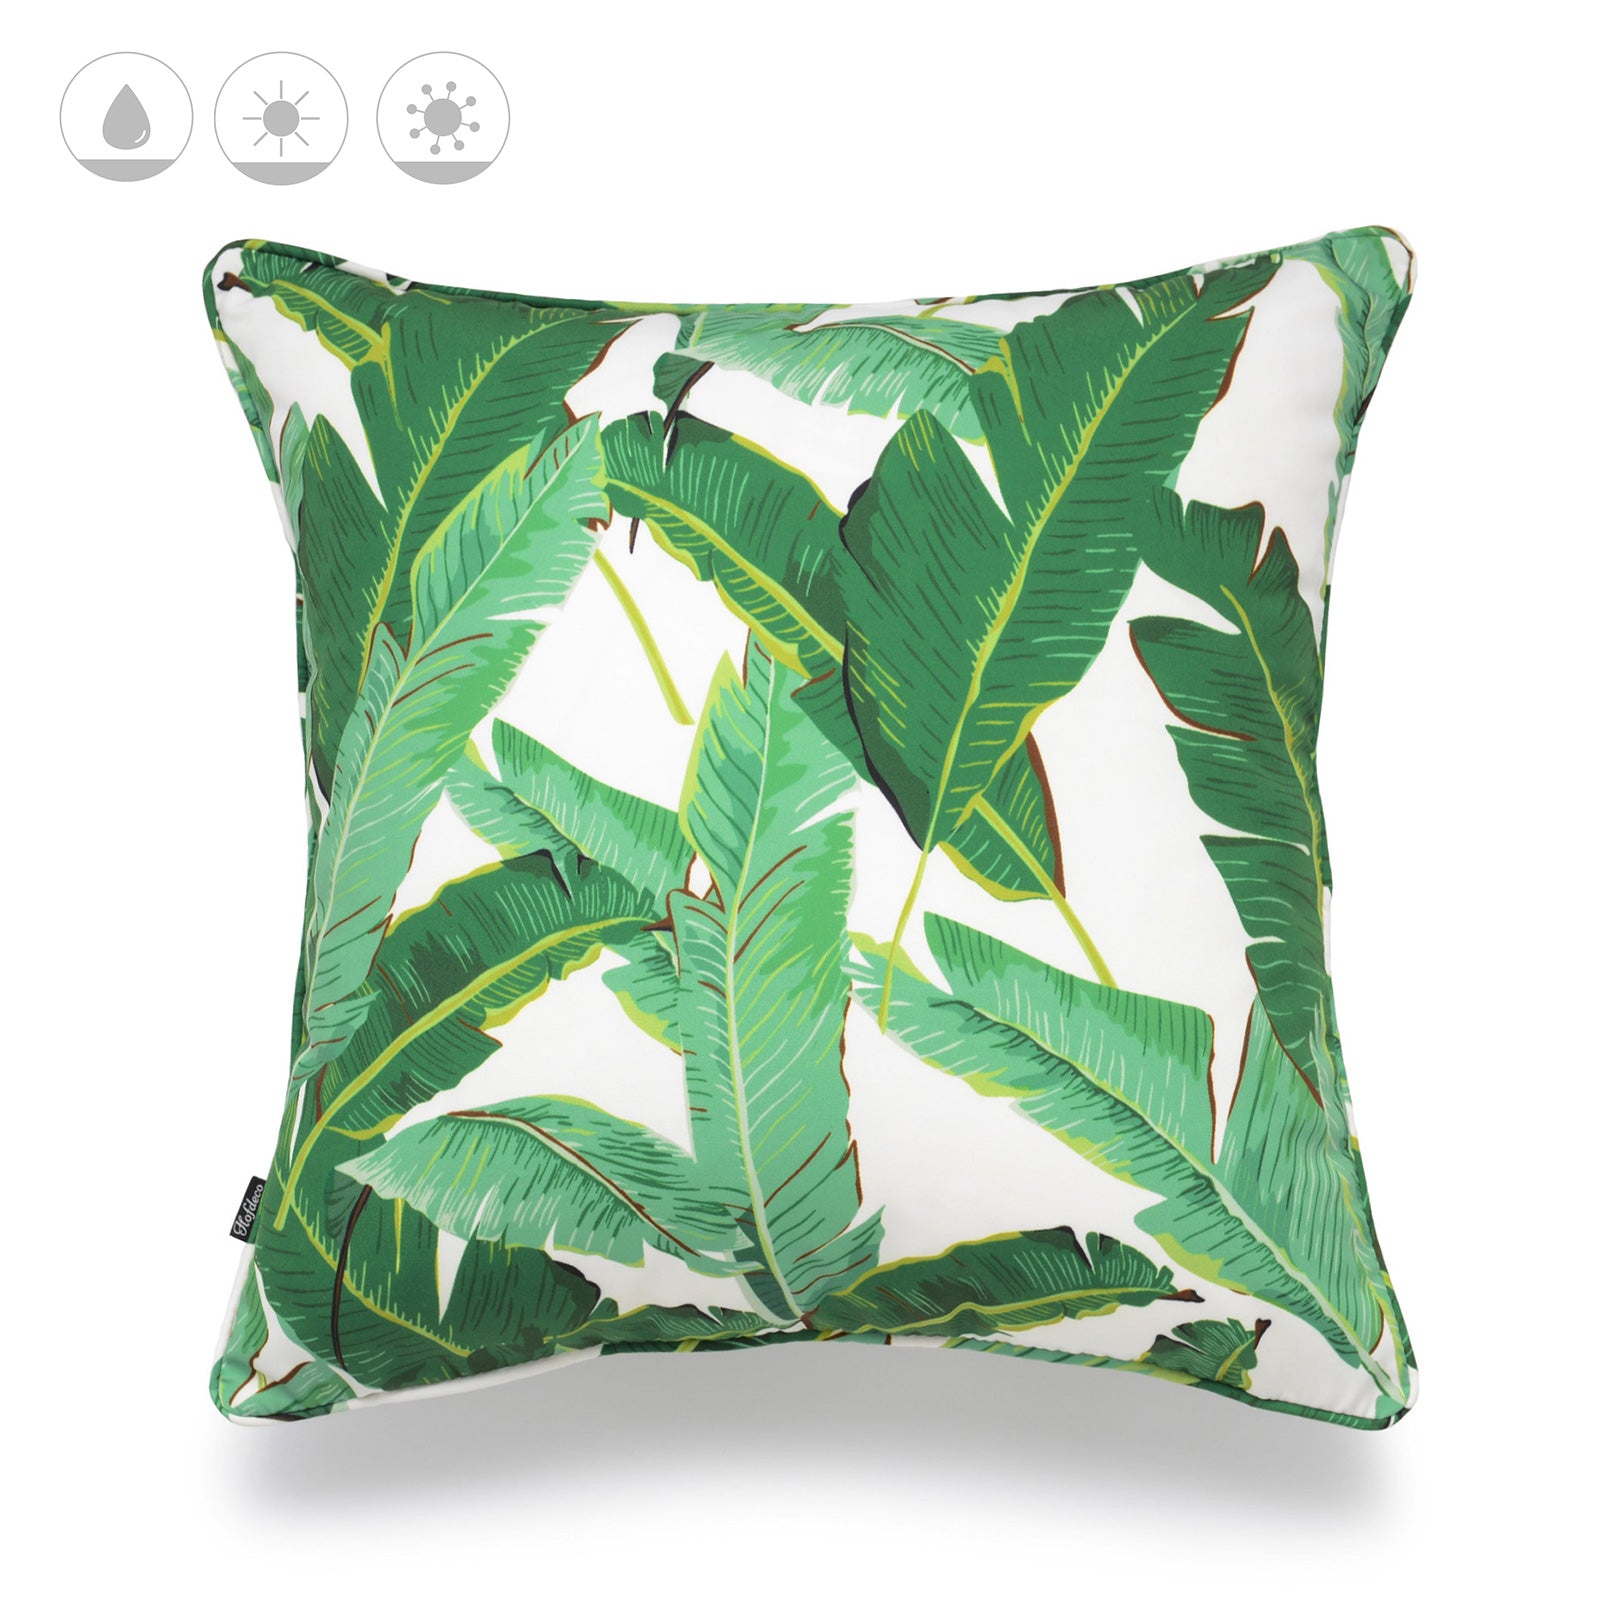 Tropical Banana Leaf Outdoor Pillow Cover, 18"x18"